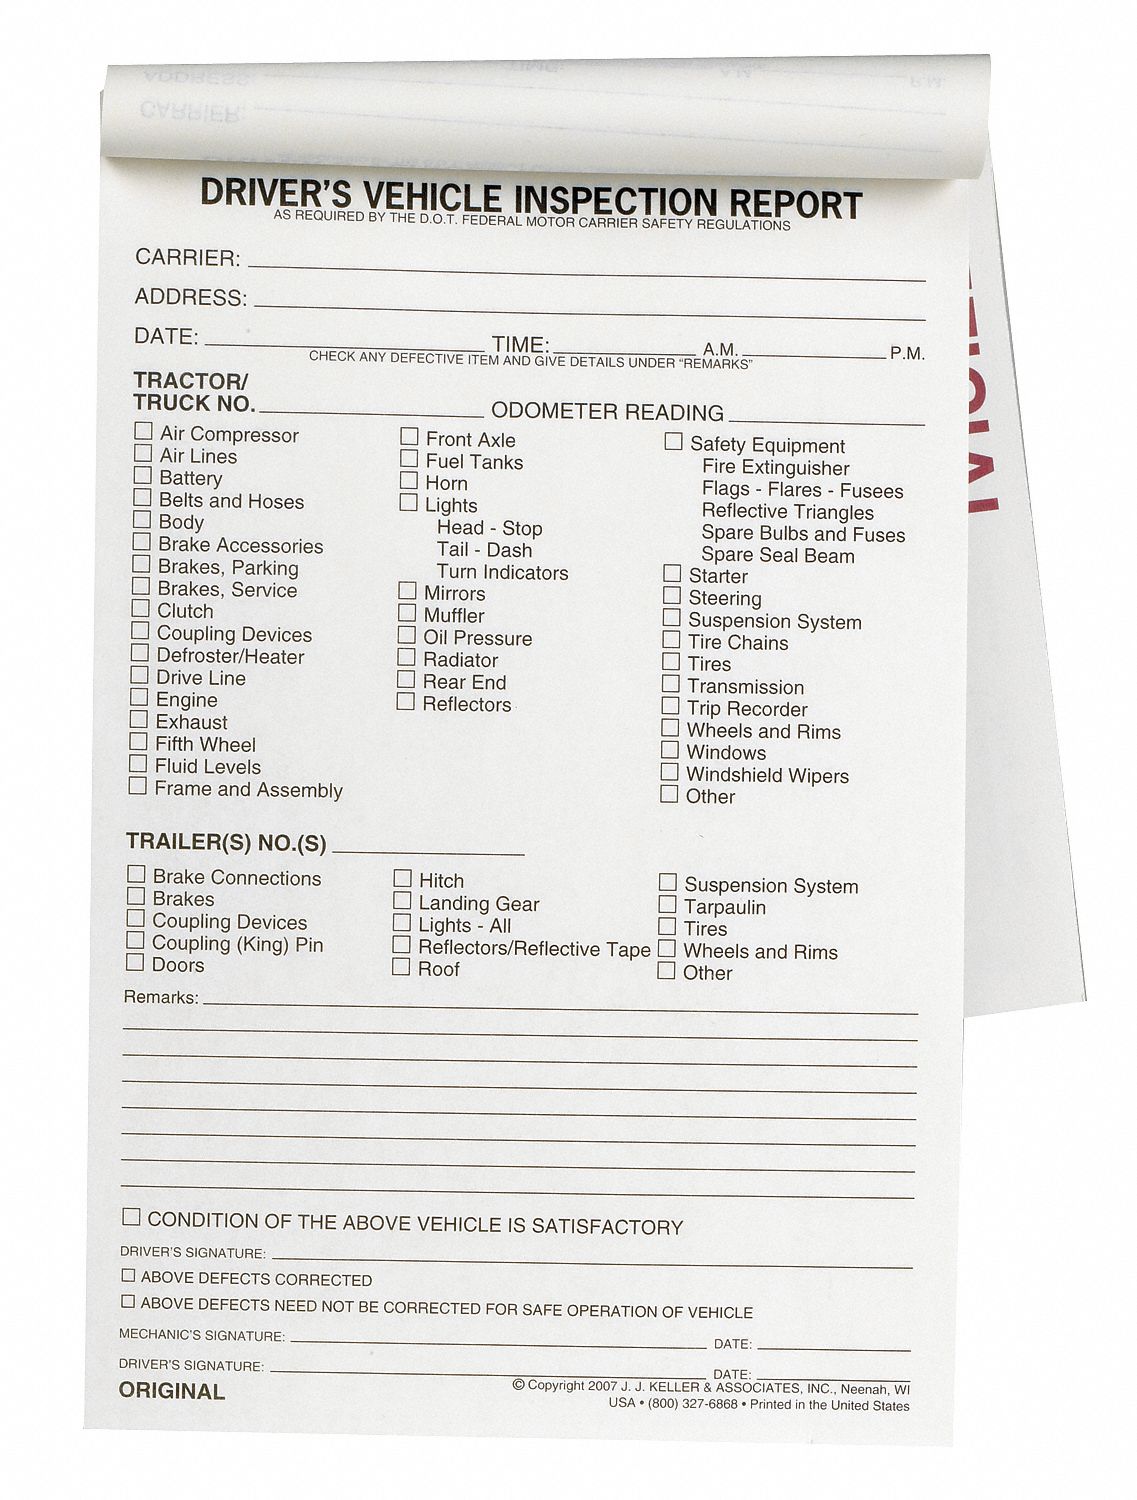 W/Carbon Vehicle Inspection Form 2 Ply